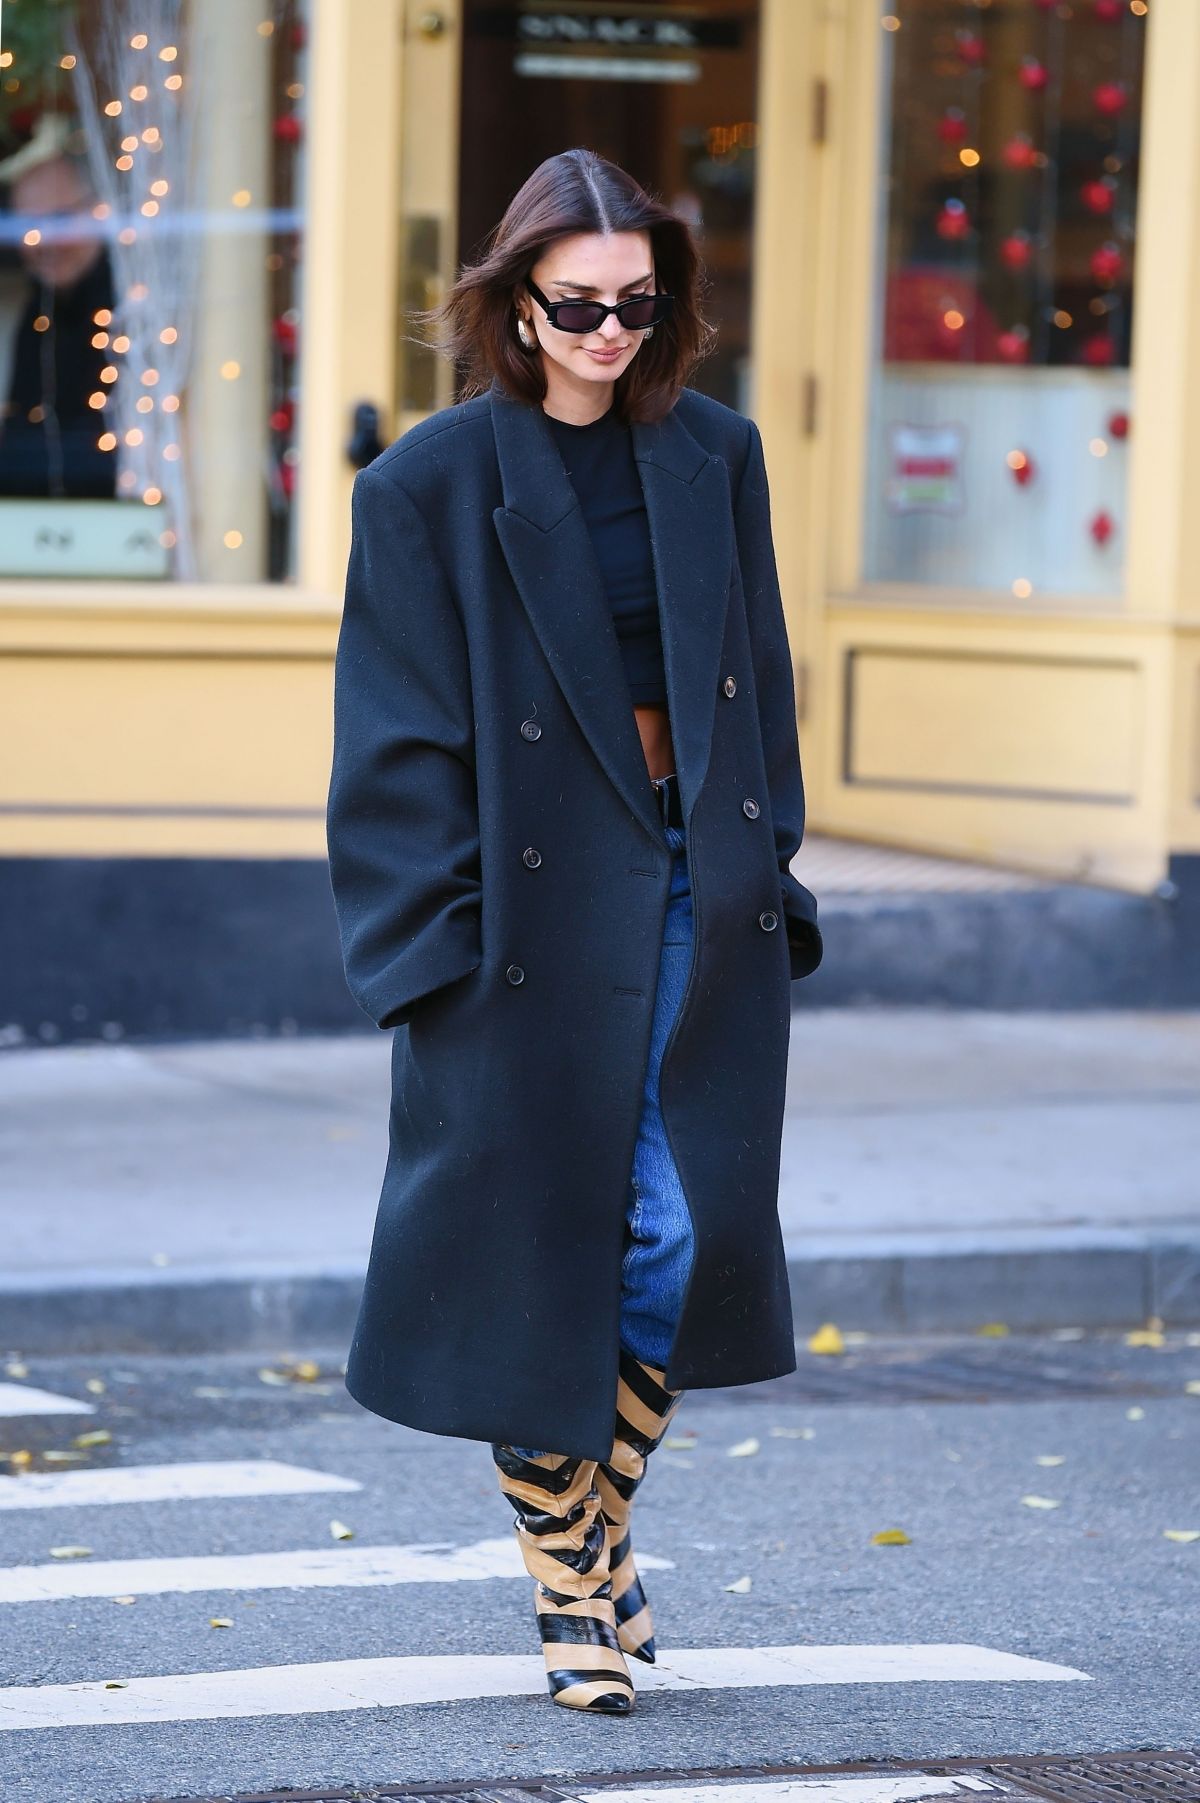 Emily Ratajkowski in Green Overcoat and Blue Denim Outfit in NYC 3